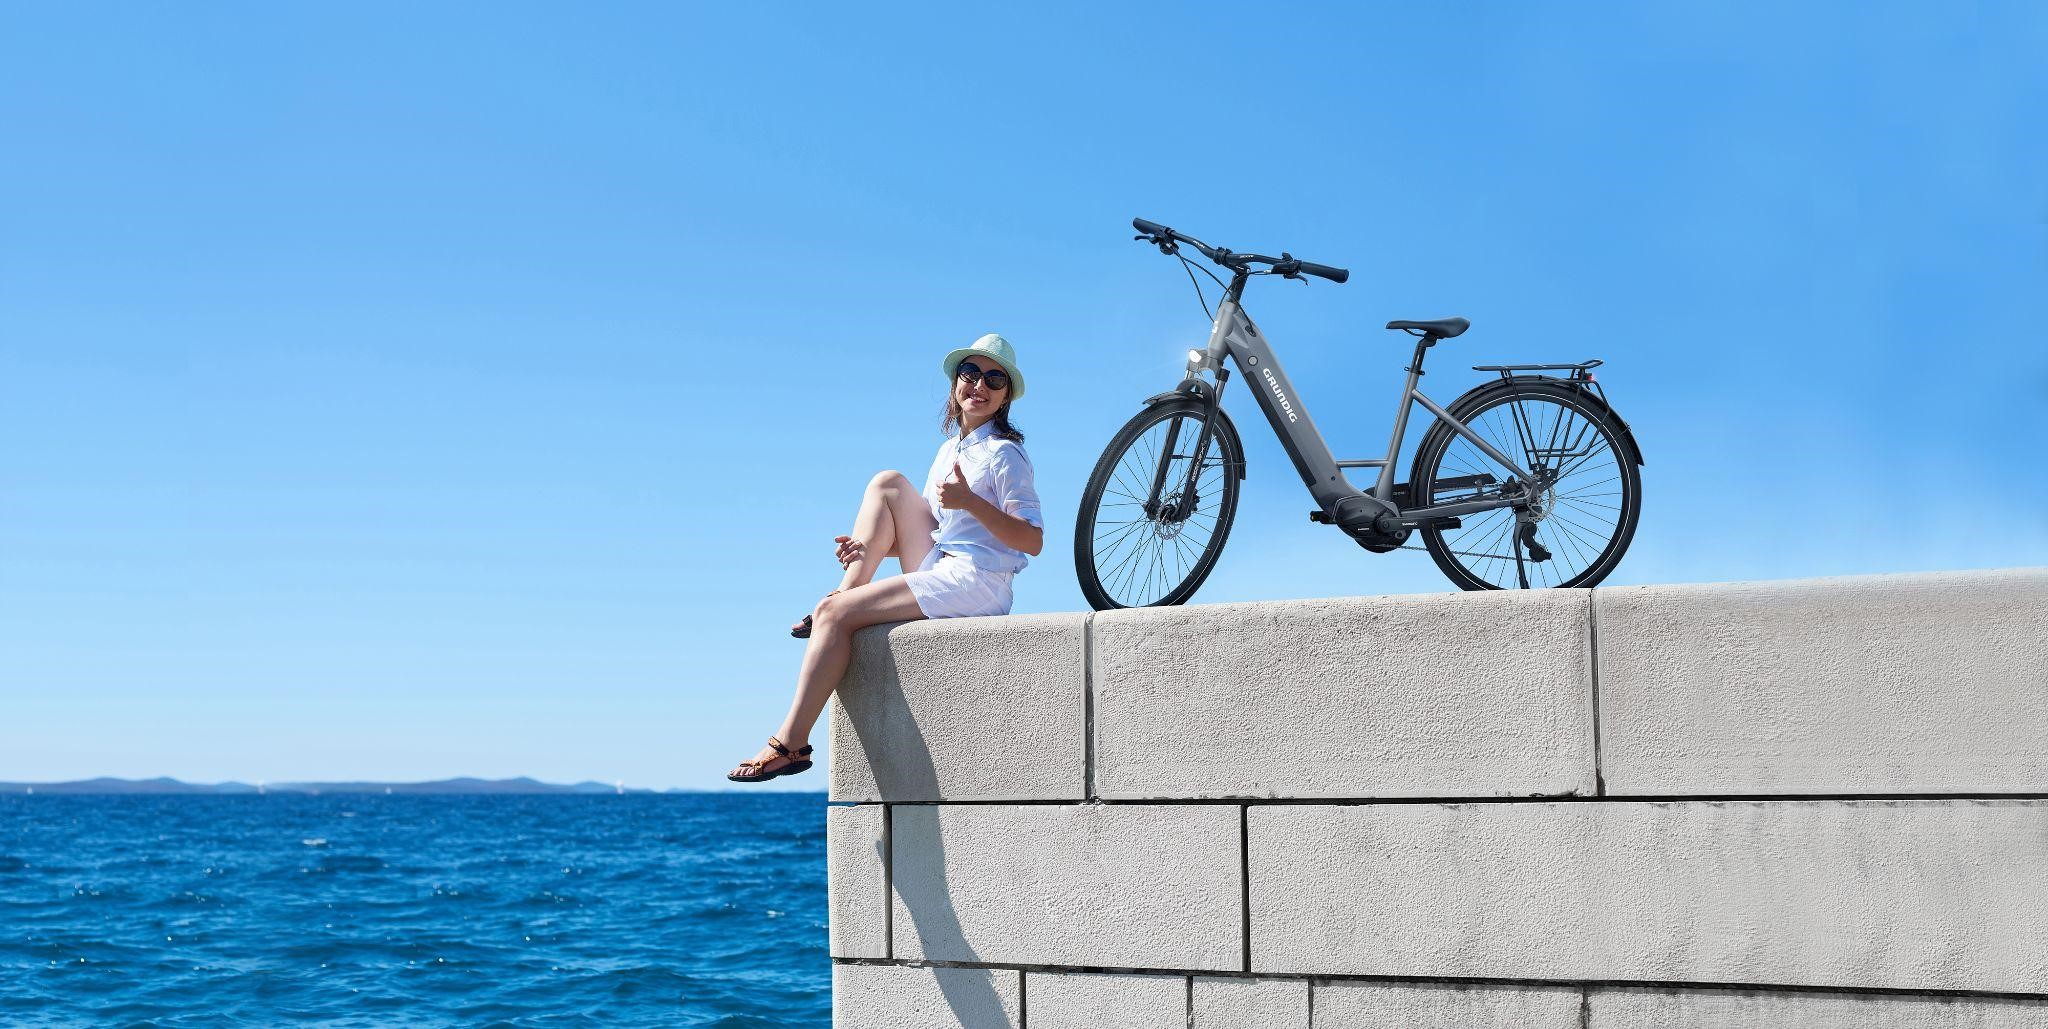 An image of a woman and her e-bike at the beach.